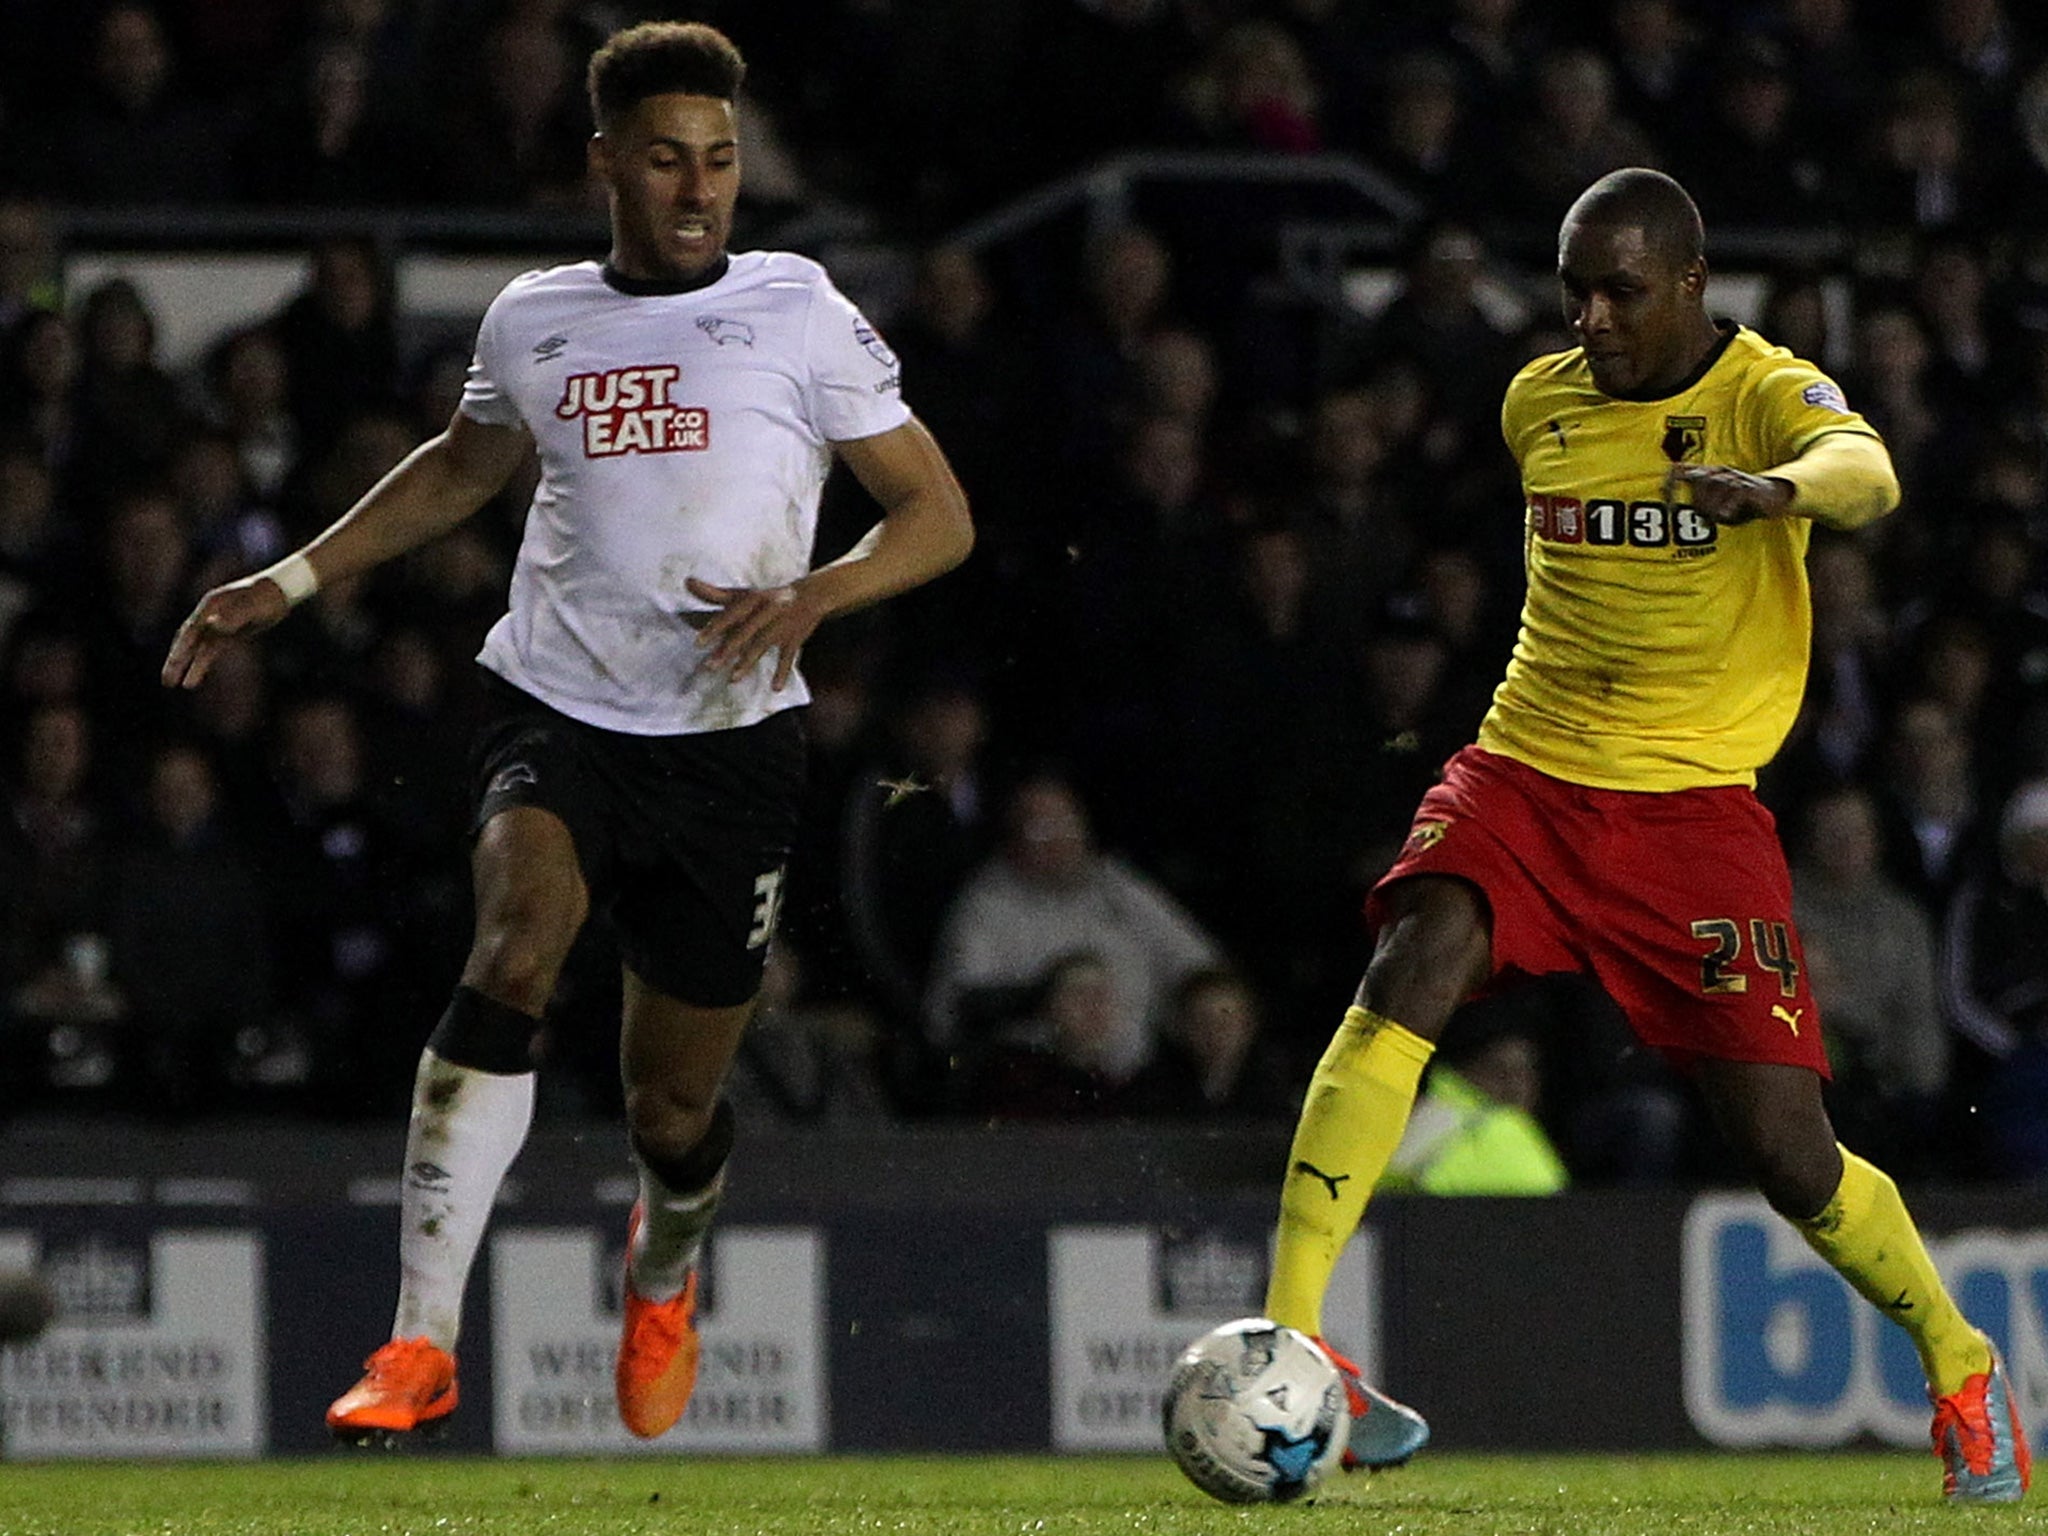 Watford’s Odion Ighalo equalises with 15 minutes left to leave Derby clinging on to a play-off spot on goal difference